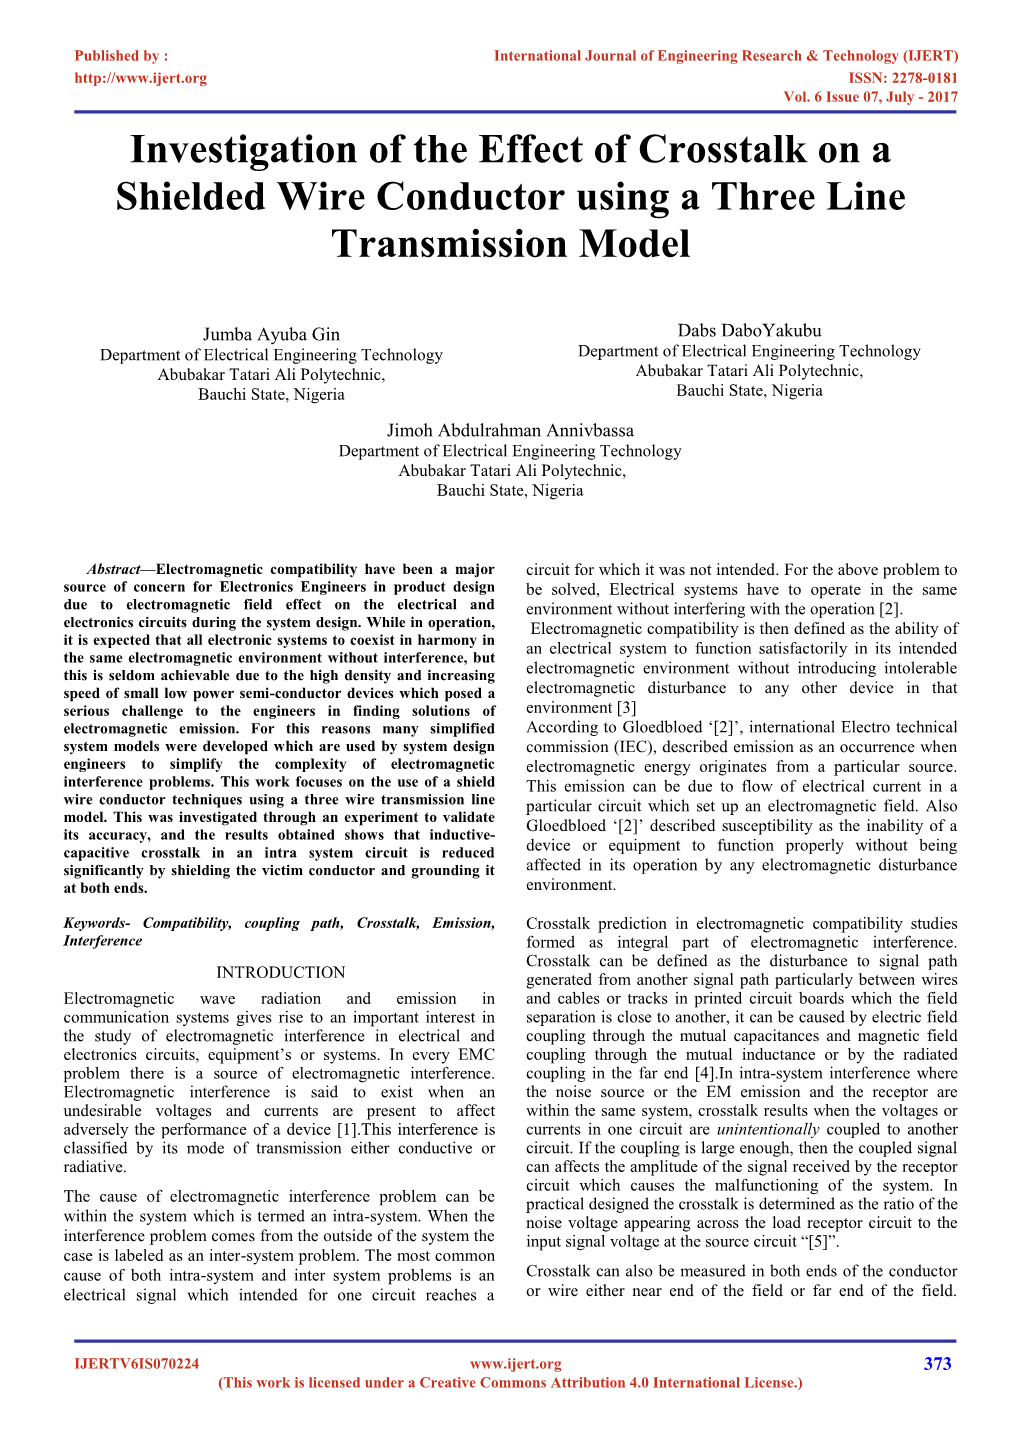 Investigation of the Effect of Crosstalk on a Shielded Wire Conductor Using a Three Line Transmission Model